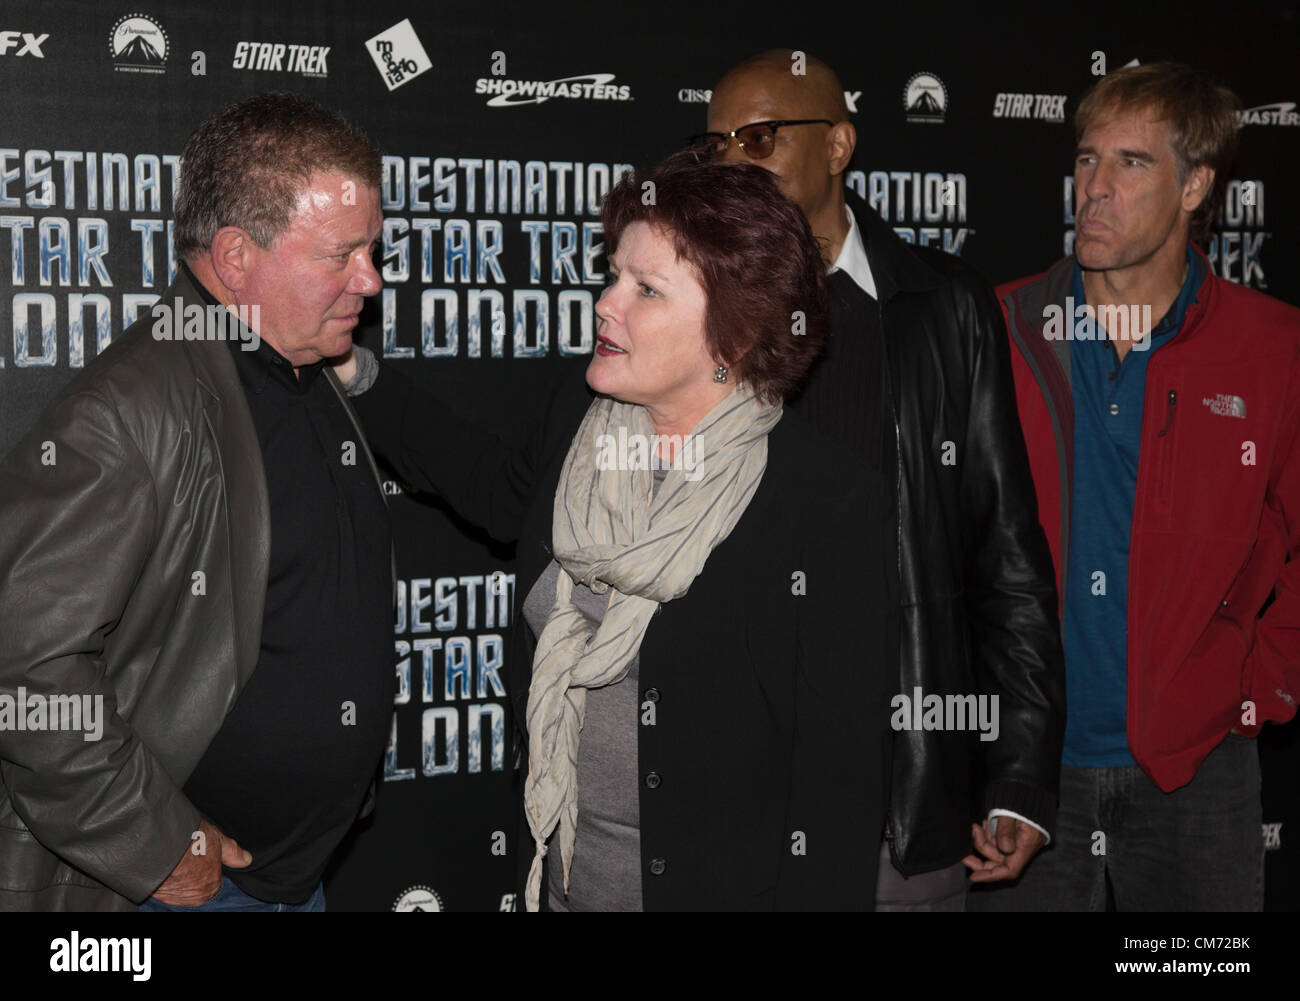 London, England, UK. Friday, 19 October 2012. Photocall with four of the five captains of the Star Trek series (L-R) William Shatner (original series), Kate Mulgrew (Voyager), Avery Brooks (Deep Space Nine) and Scott Bakula (Enterprise) at Destination Star Trek. Sir Patrick Stewart who played Captain Jean-Luc Picard in The Next Generation refused to join his fellow actors for the photocall although he was standing only yards away. Stars are enticing Patrick Stewart to join in. The Convention takes place at the ExCel Exhibition Centre in East London from 19-21 October 2012. Photo credit: Nick S Stock Photo